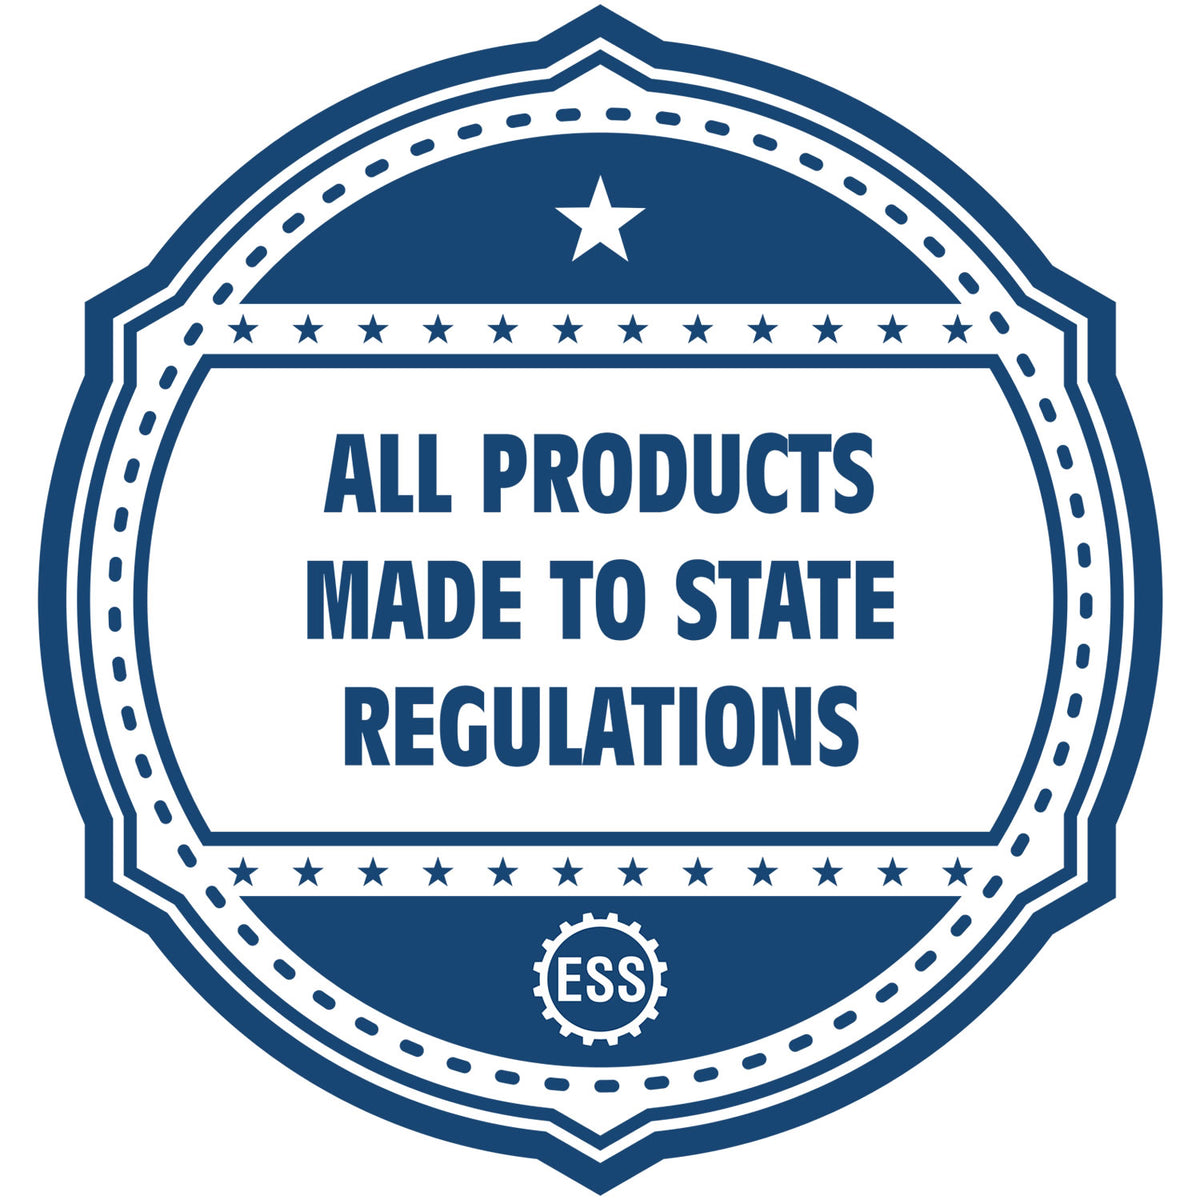 A blue icon or badge for the Soft New Hampshire Professional Geologist Seal showing that this product is made in compliance with state regulations.